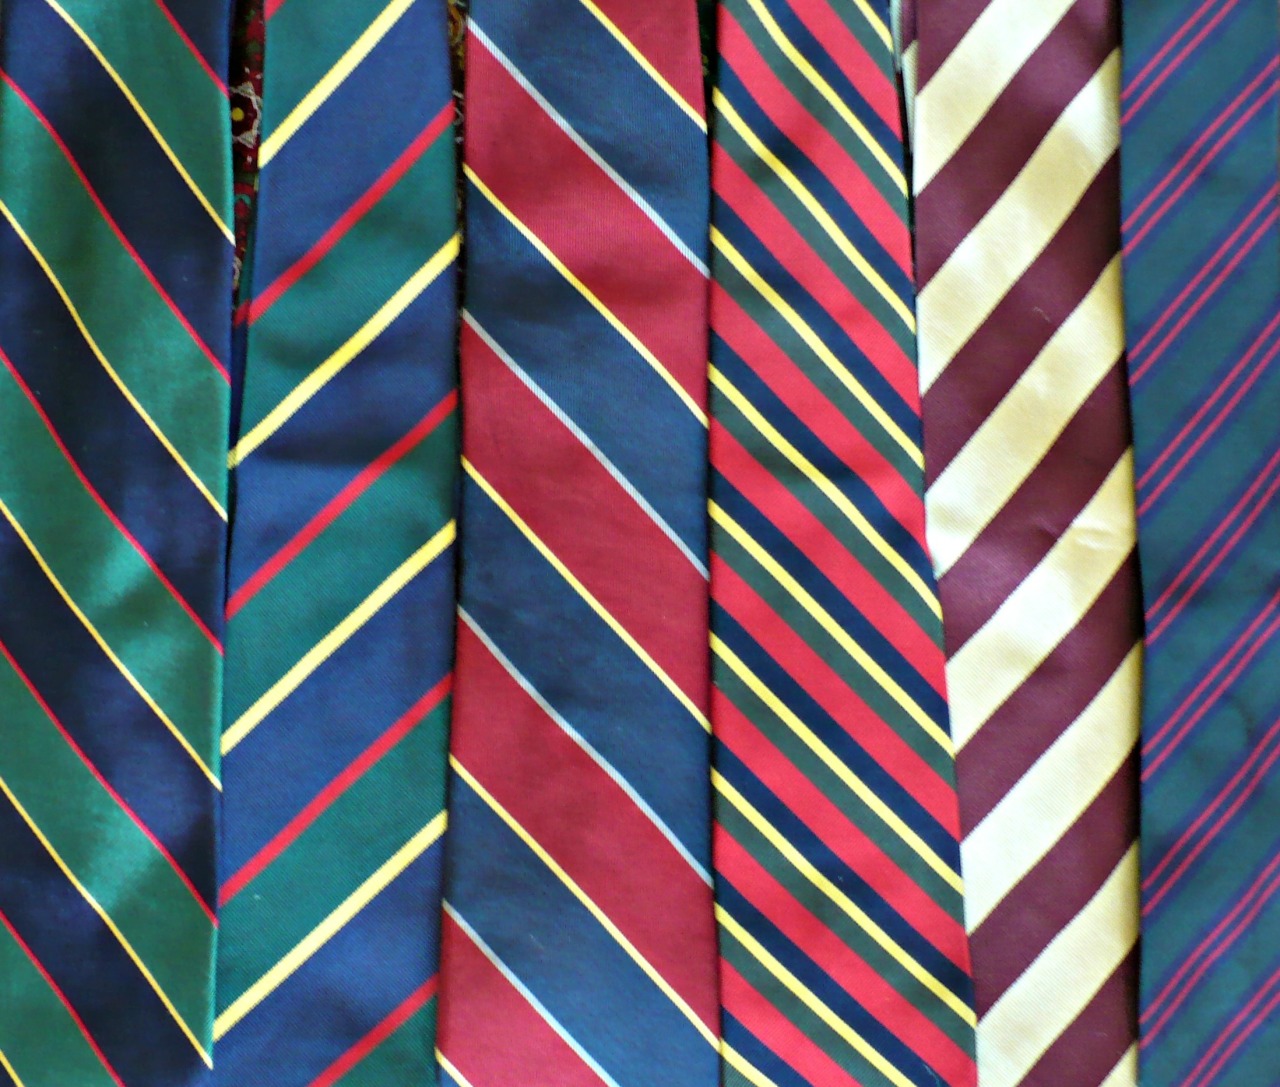 Building an Affordable Neckwear Collection